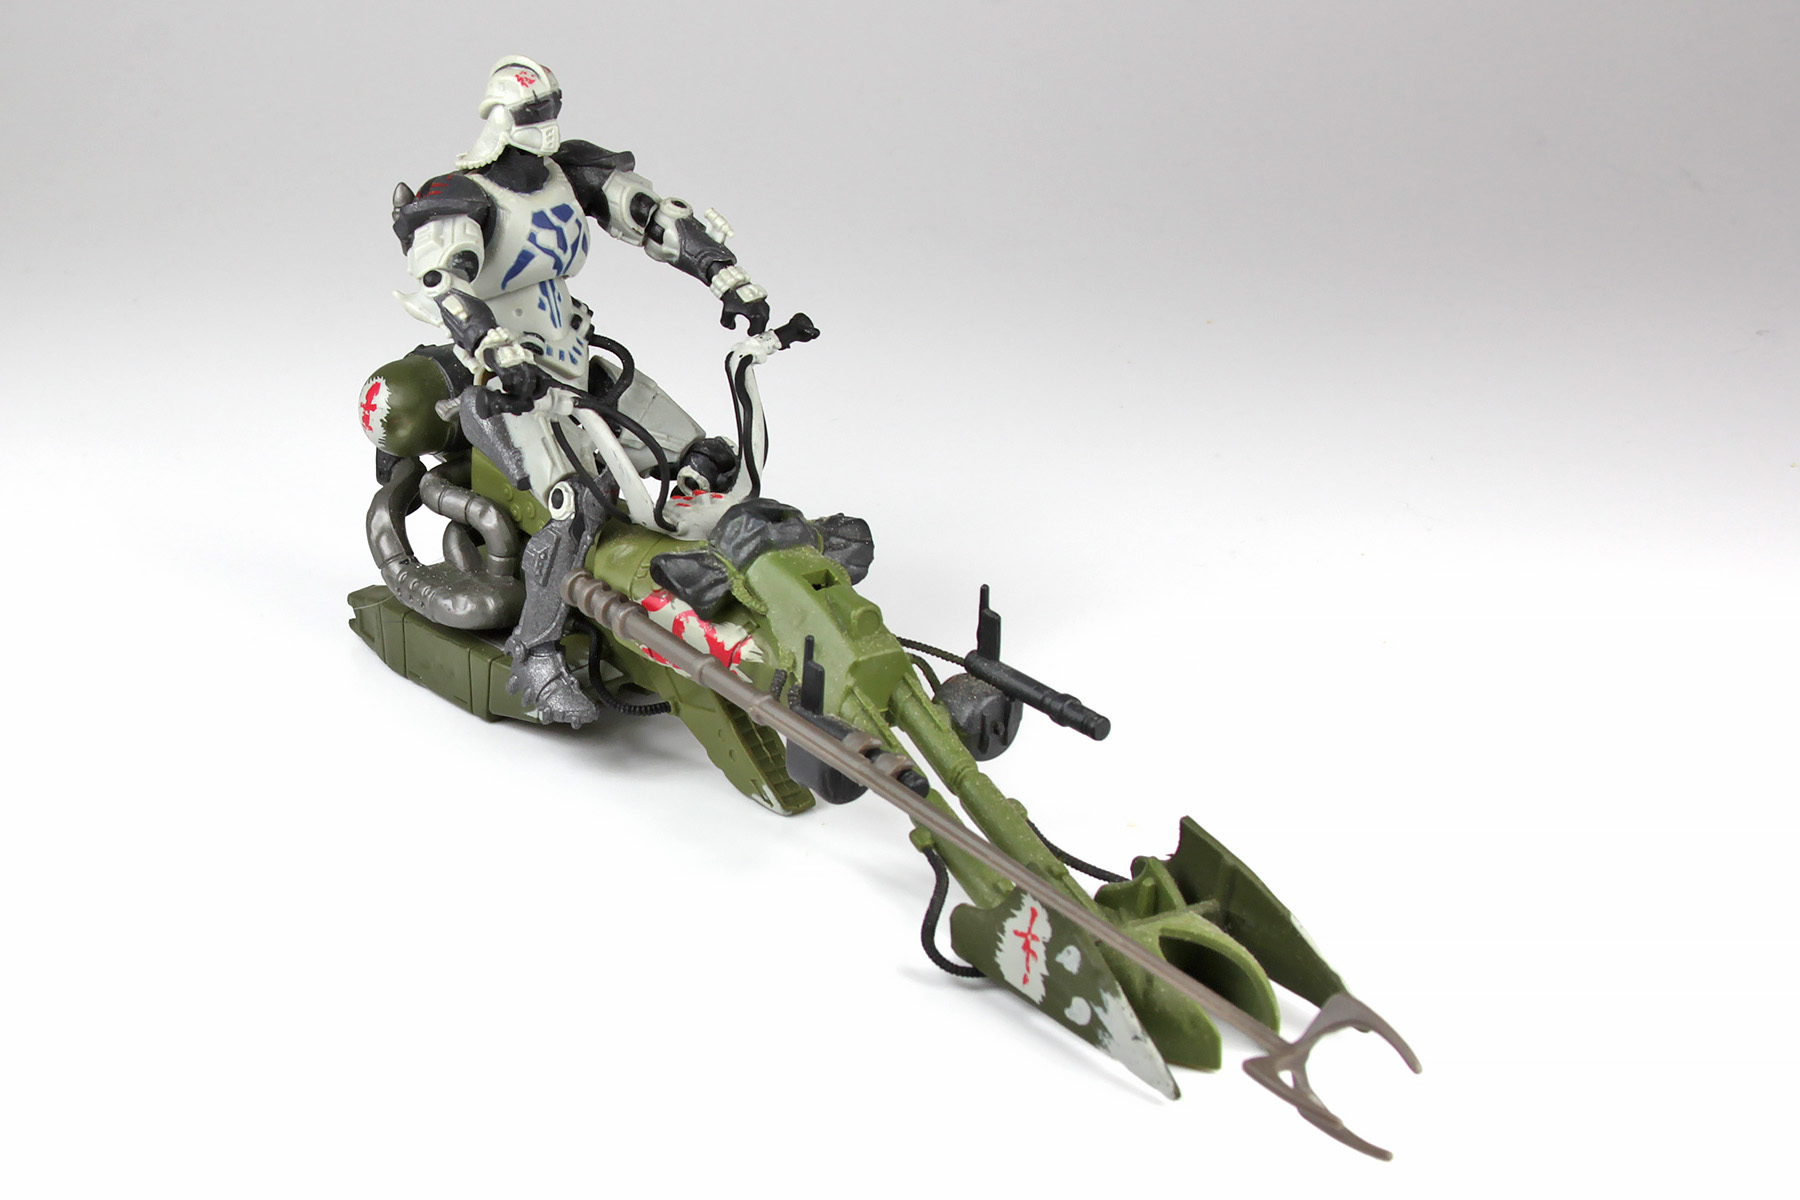 Pictured above is the deluxe Durge with Swoop Bike figure. 